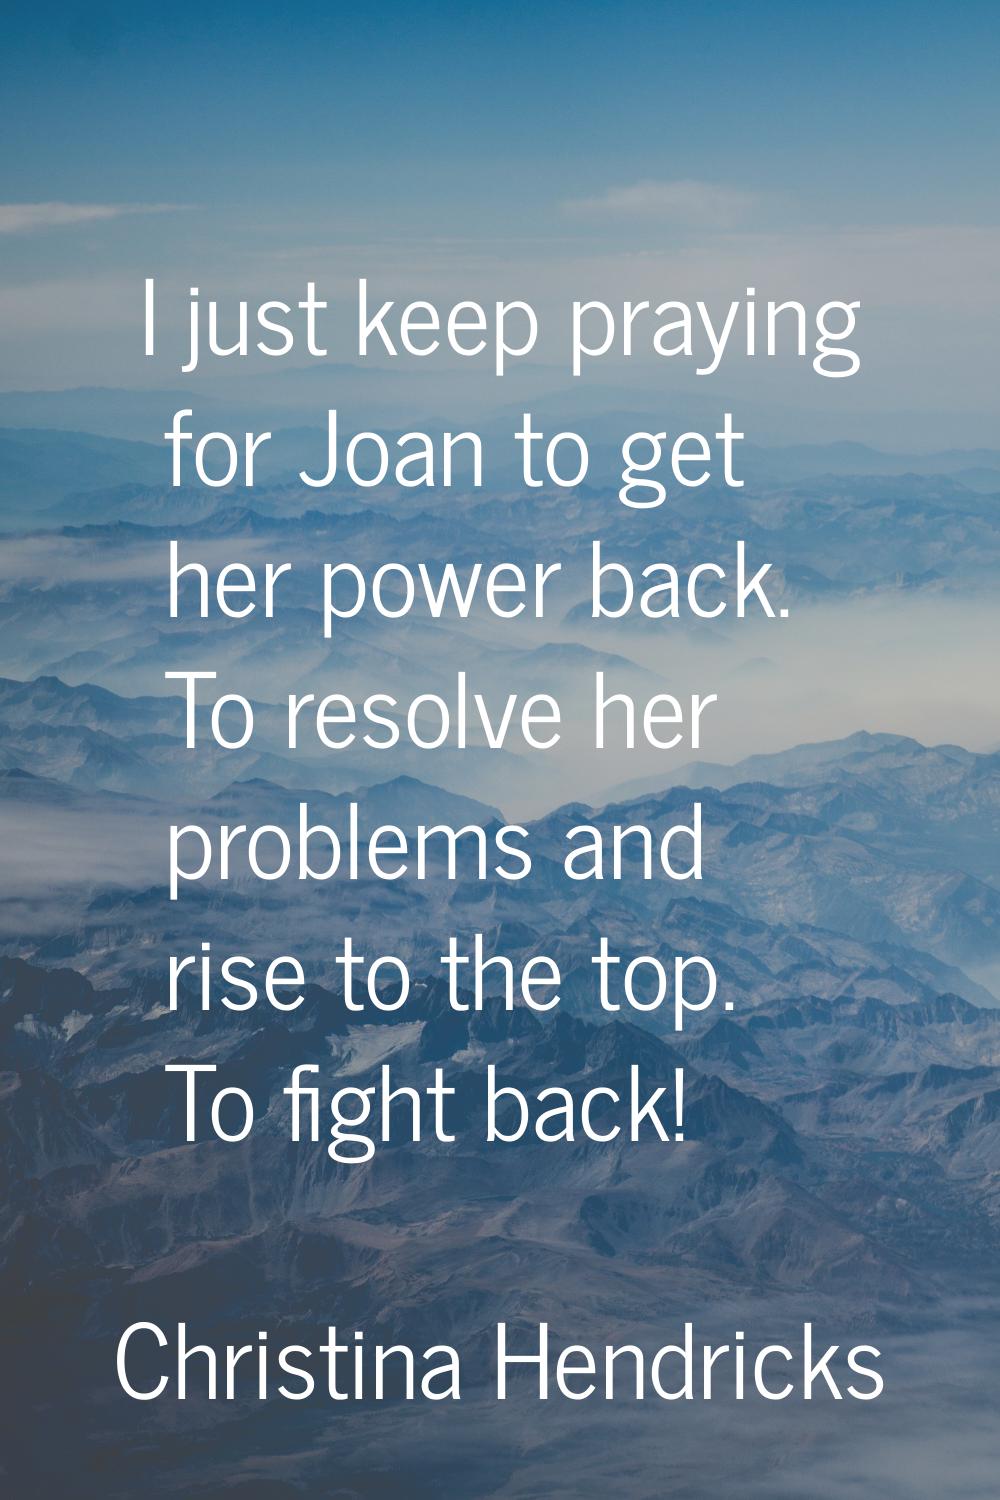 I just keep praying for Joan to get her power back. To resolve her problems and rise to the top. To